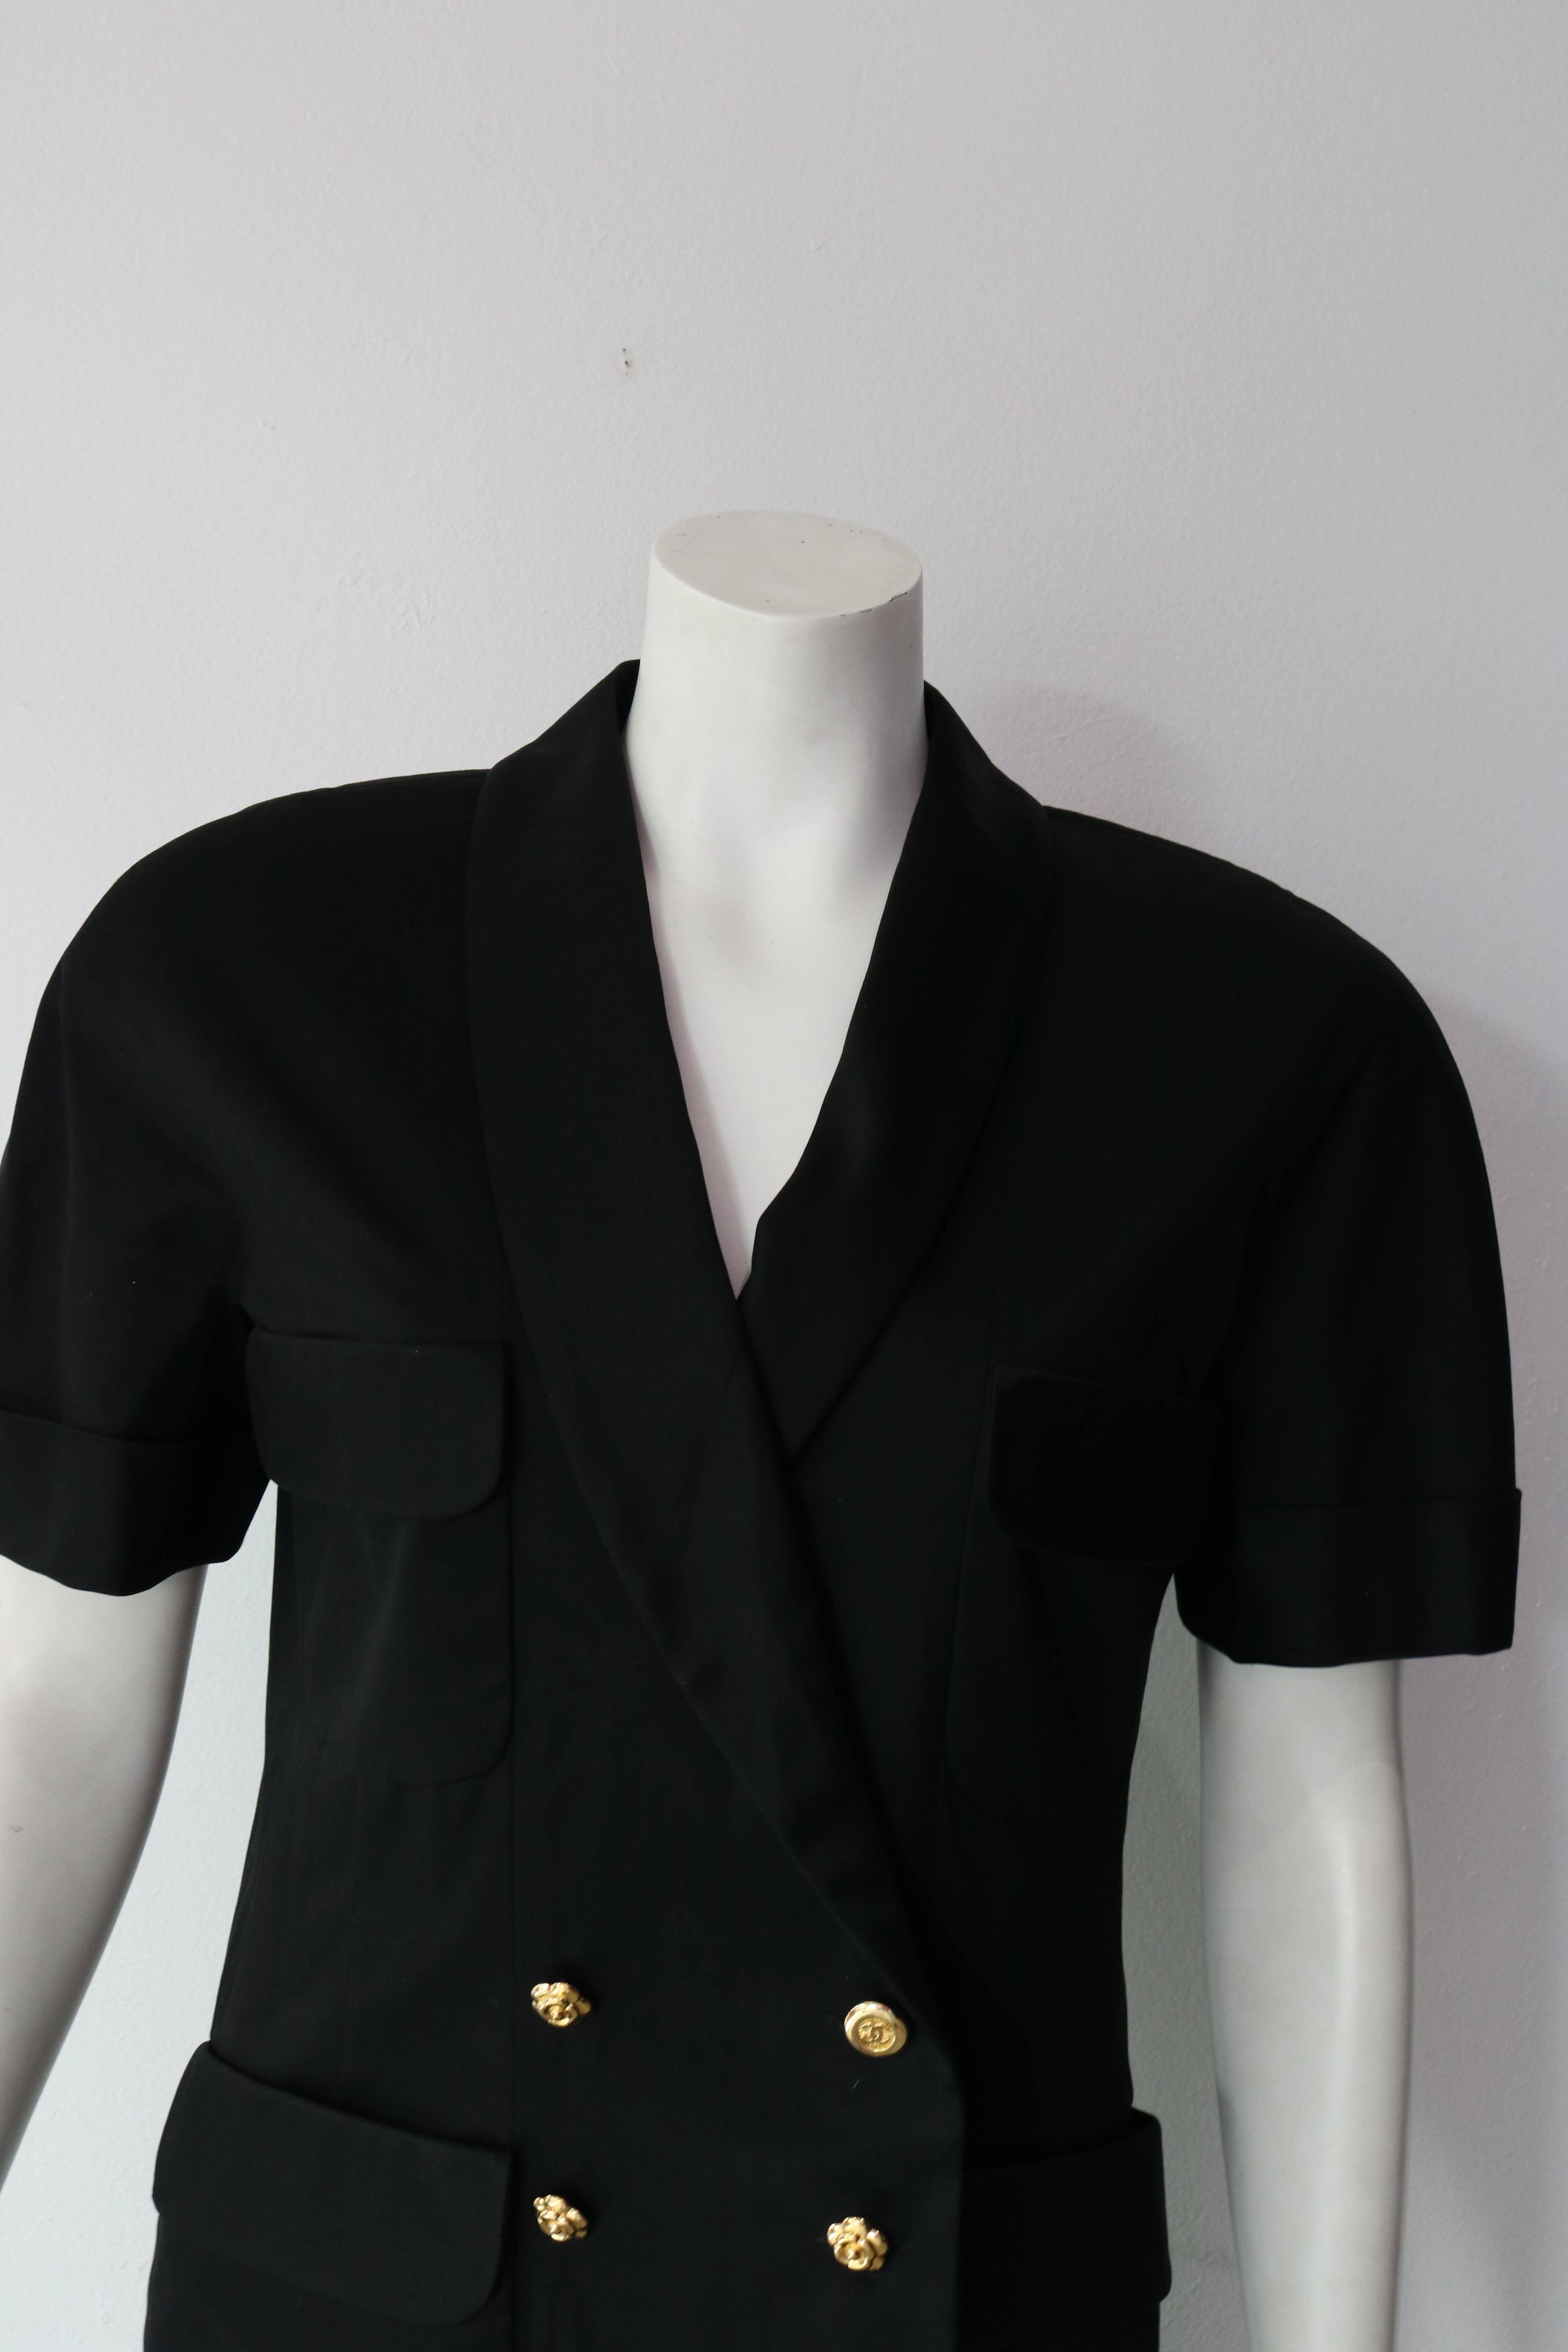 Vintage Chanel suit dress 
Epically Classic and Chic 
Size 40 
Color black 
Made in France 

